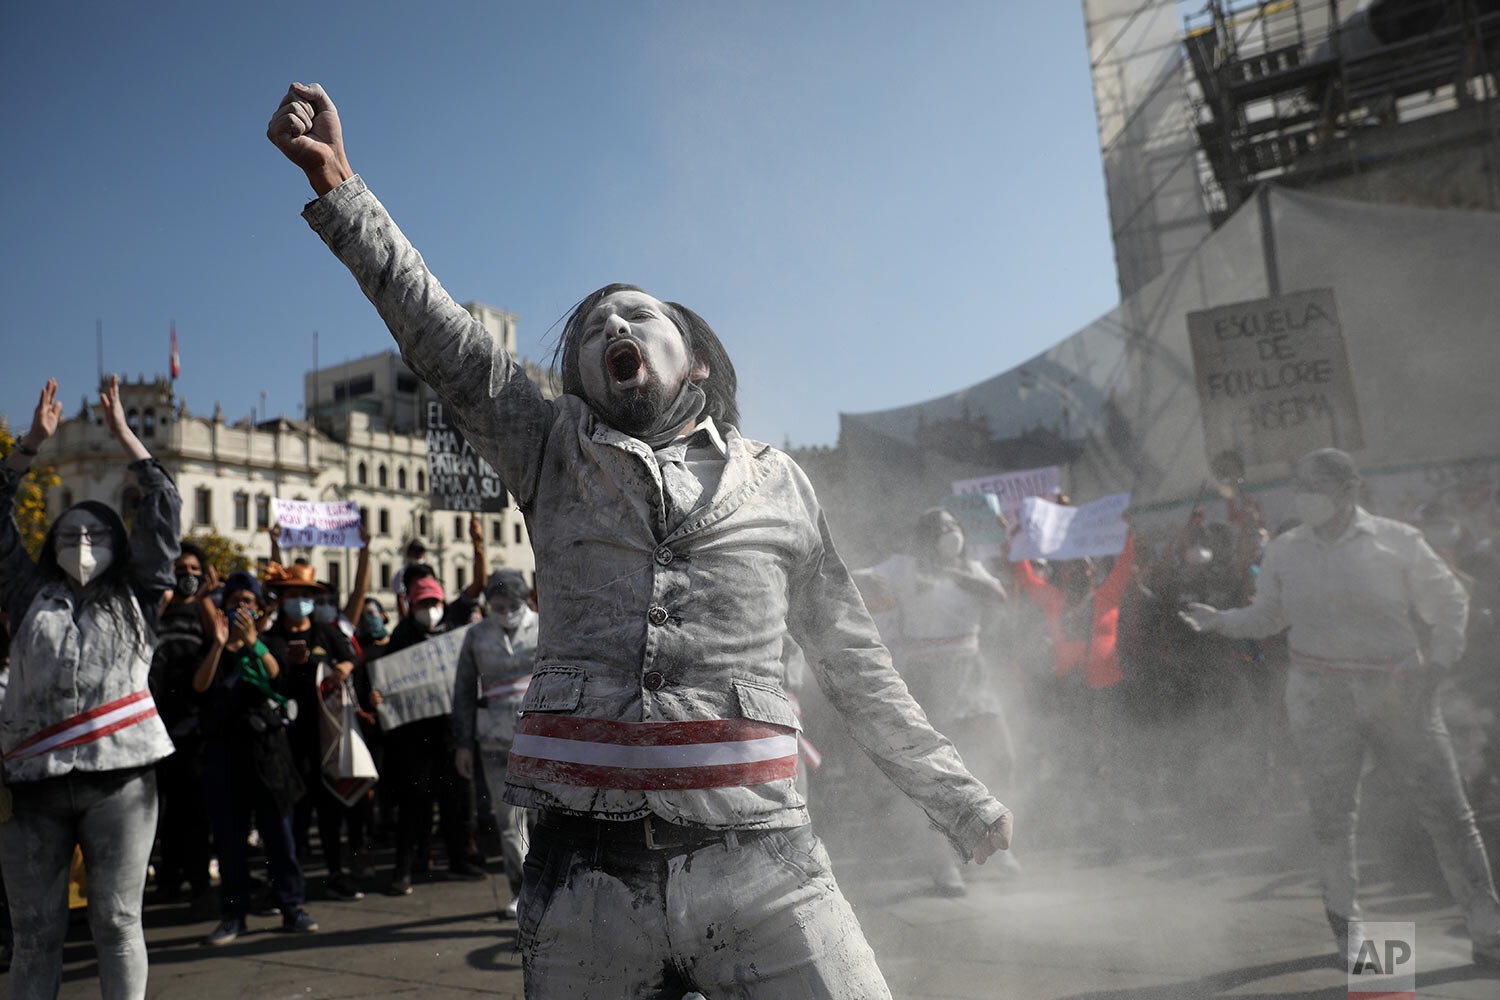  A man dressed as a zombie wears a presidential sash to represent himself as a minister of Peru's newly sworn-in president, gets revved up in San Martin plaza where people who are refusing to recognize the new government gather to protest, in Lima, S